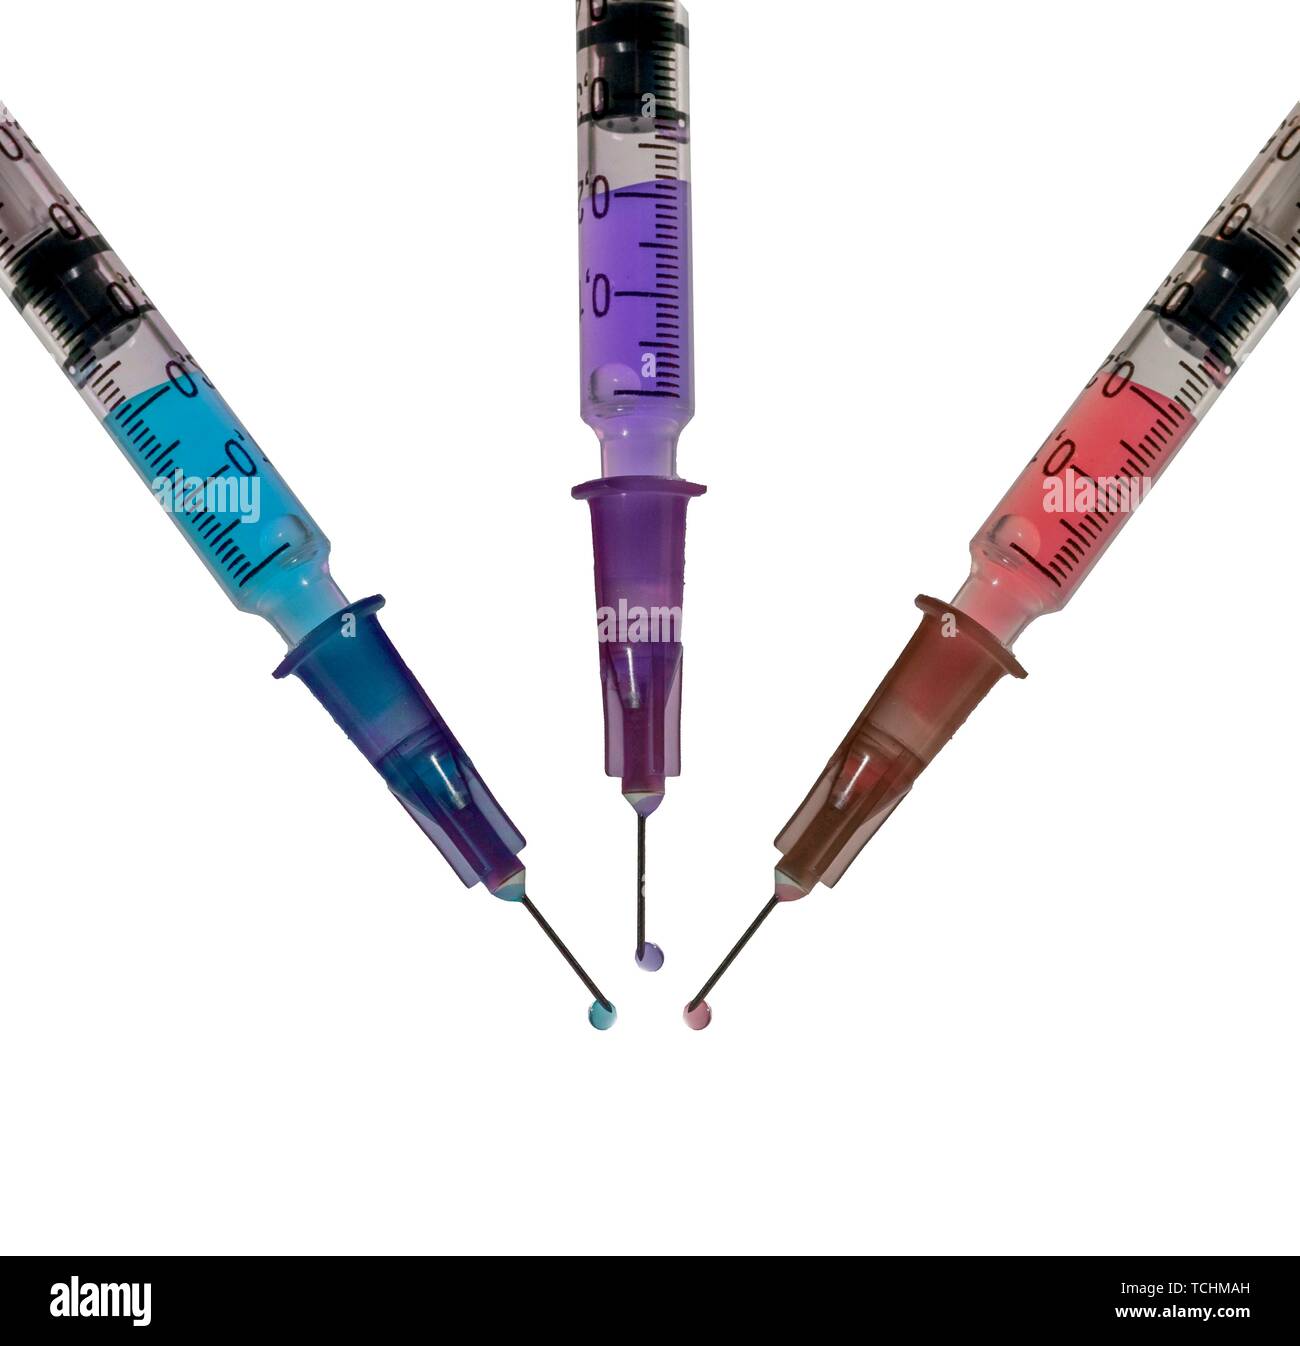 Hypodermic syringes filled with colourful liquid Stock Photo